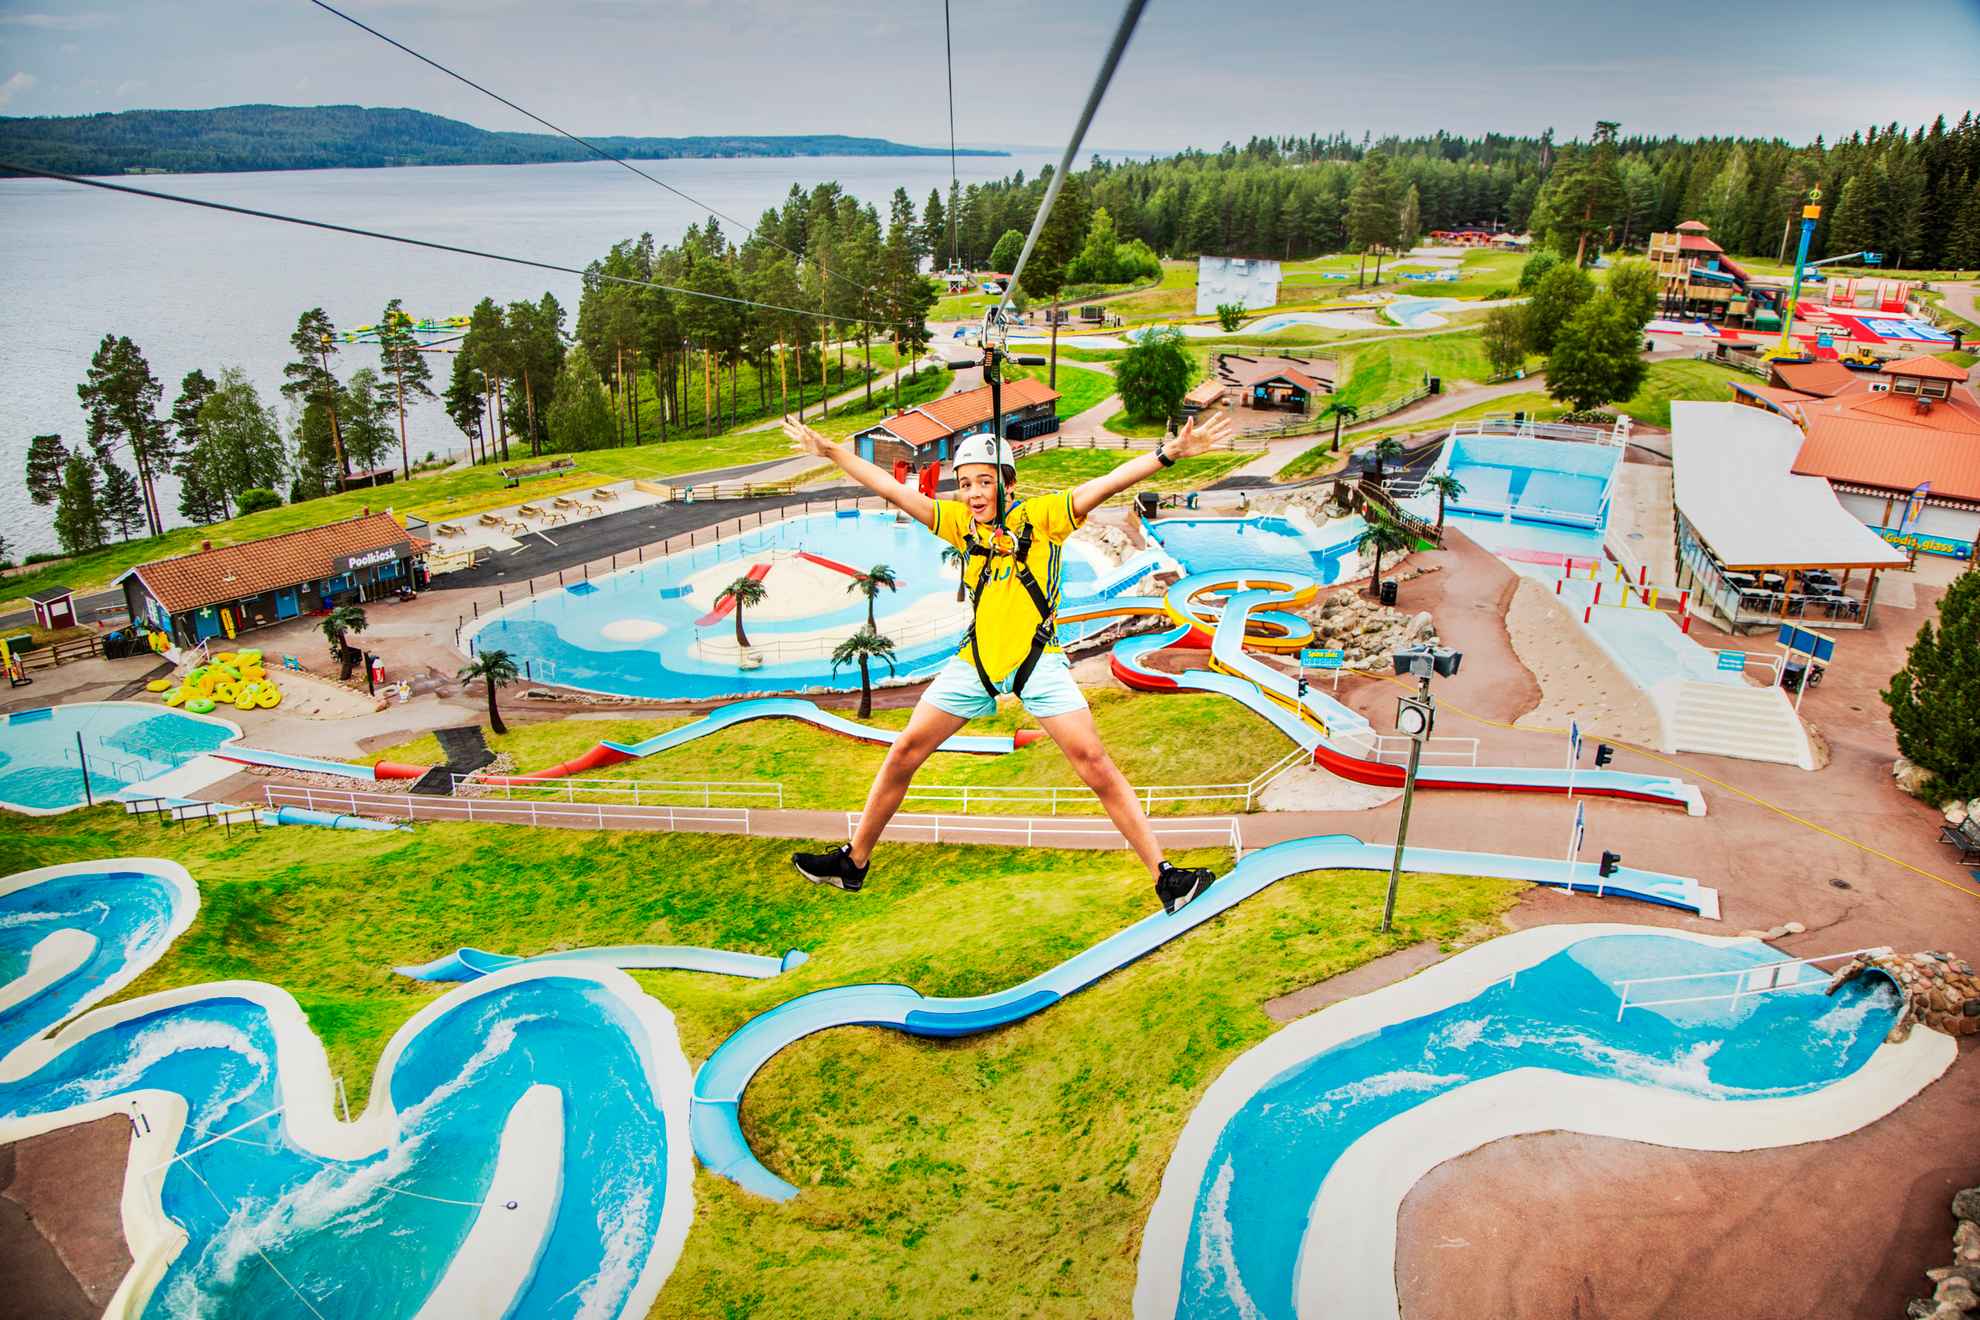 A child rides a zipline over the water park at Leksand Sommarland.